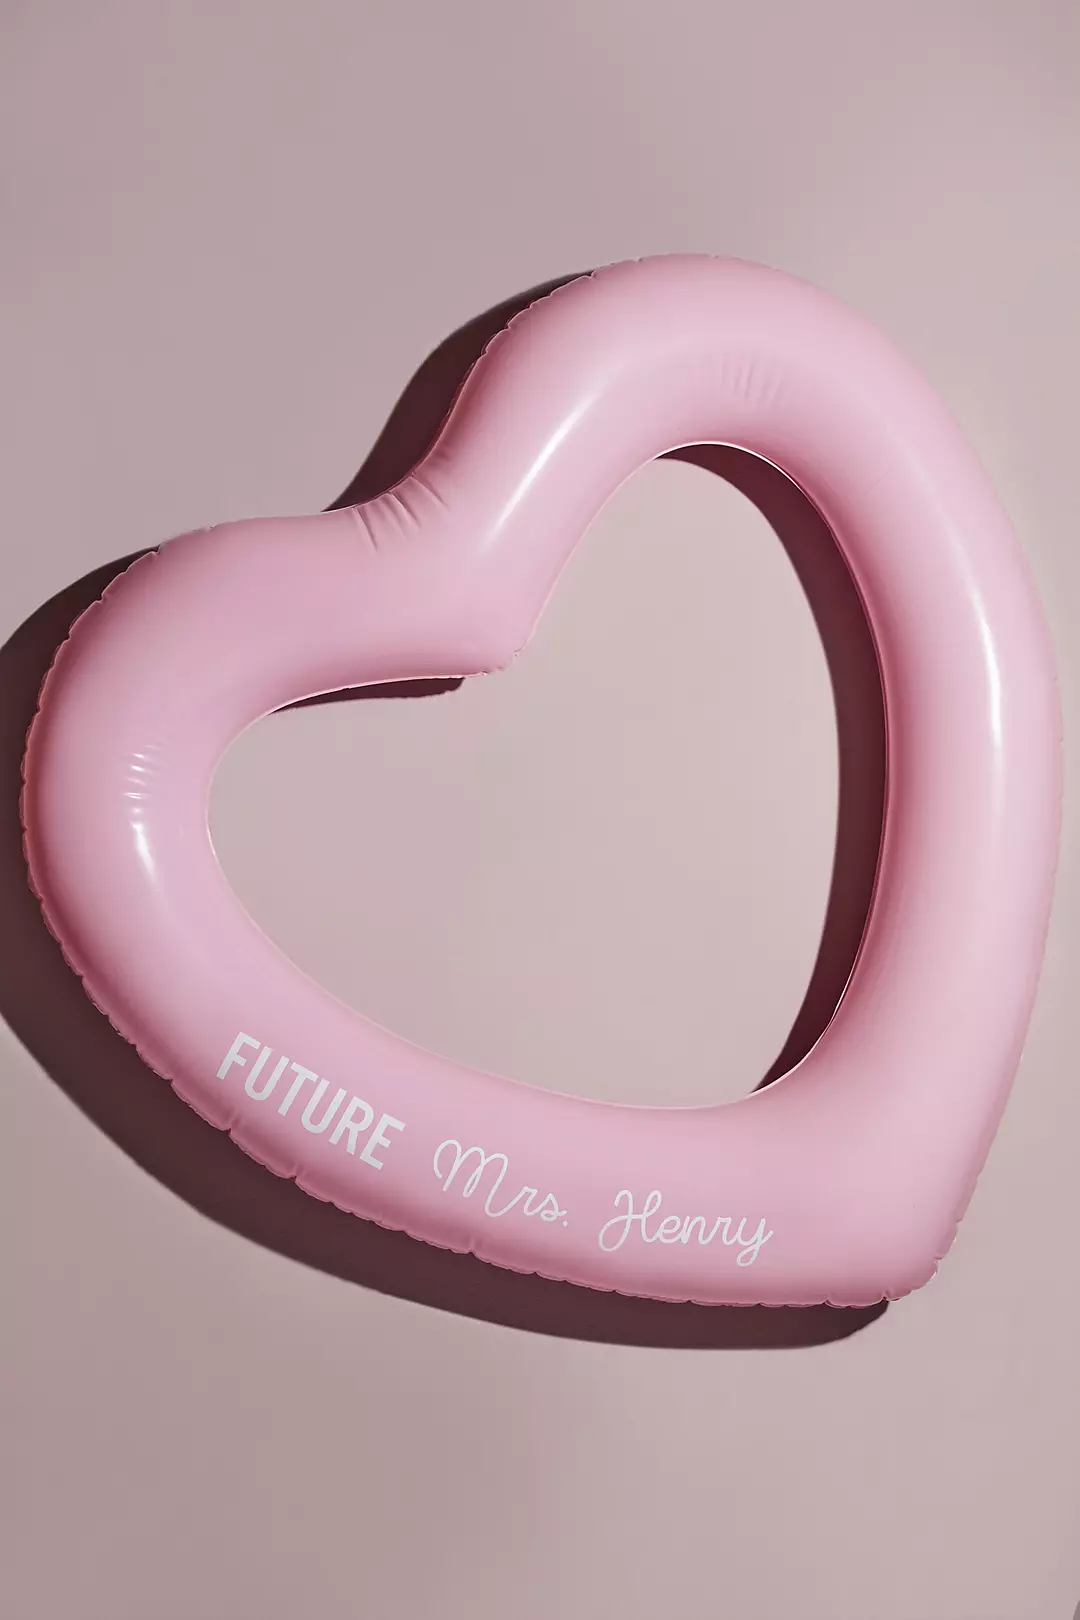 Personalized Heart-Shaped Pool Floatie Image